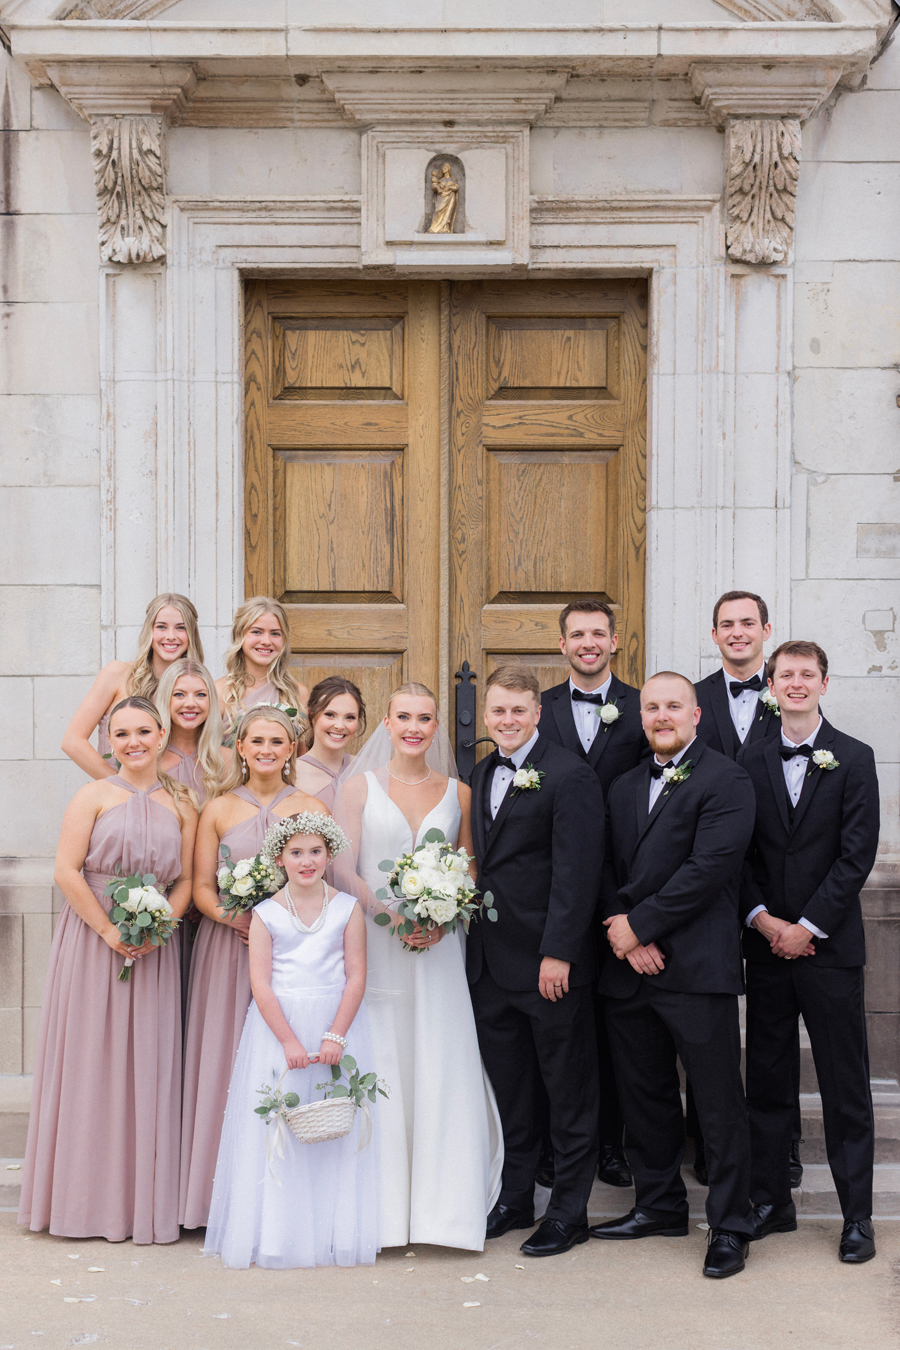 A wedding party poses for portraits at the Church of St. Mary, Aldermanbury at a Westminster College wedding by Love Tree Studios.